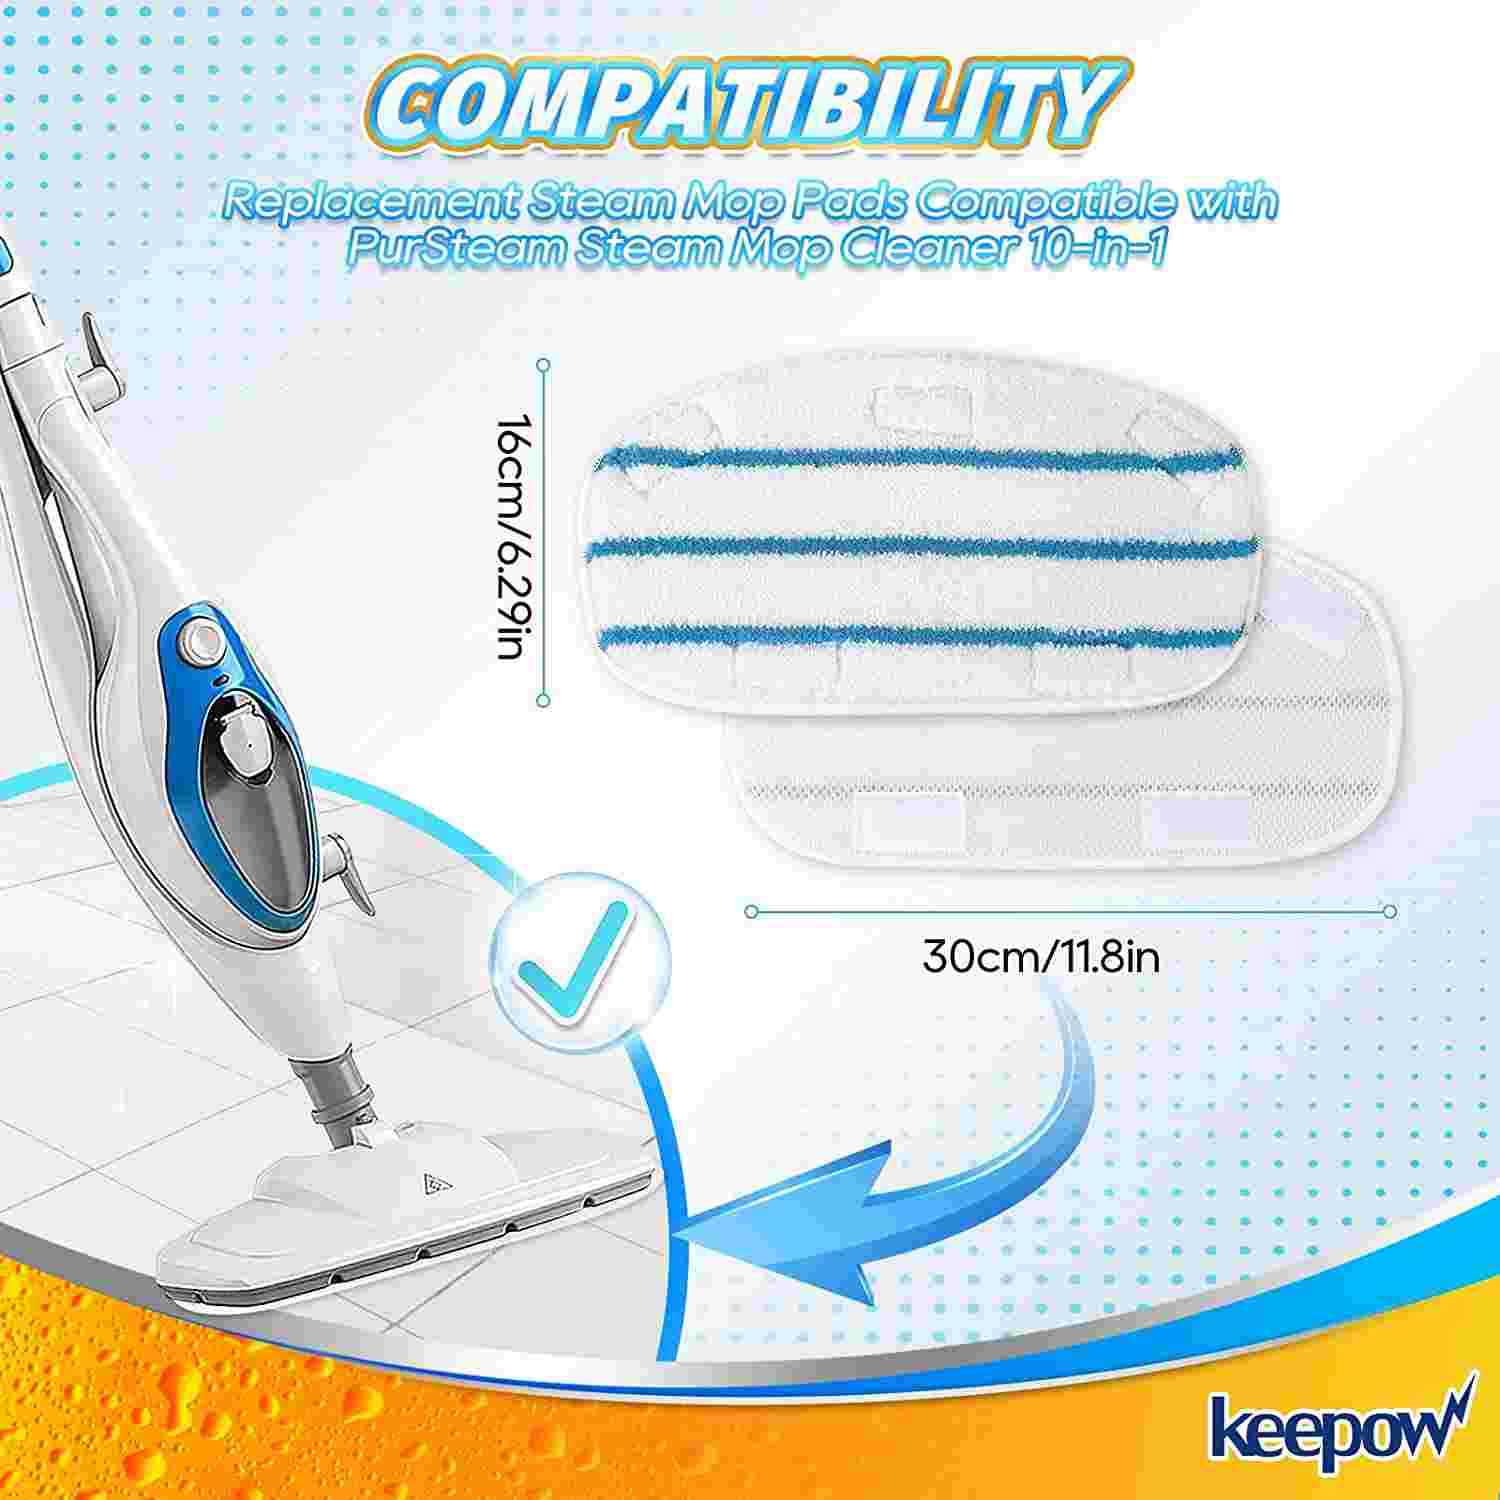 KEEPOW Steam Mop Pads Compatible with PurSteam Steam Mop Cleaner 10-in-1/ThermaPro 211, Washable/Reusable Microfiber Replacement Mopping Pads, 5 Pack